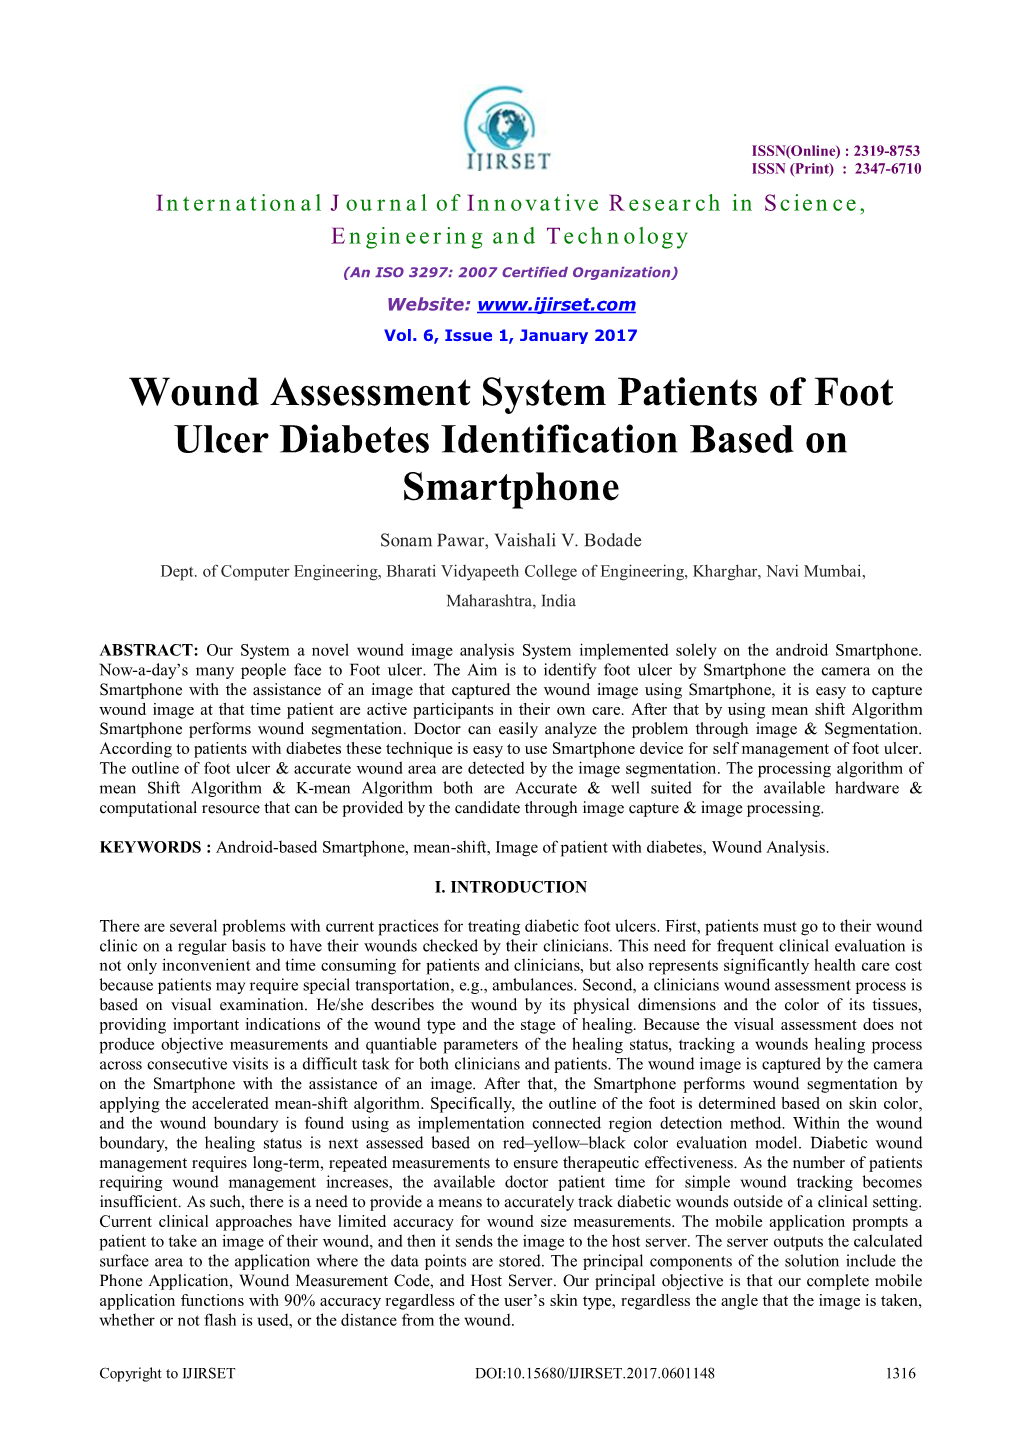 Wound Assessment System Patients of Foot Ulcer Diabetes Identification Based on Smartphone